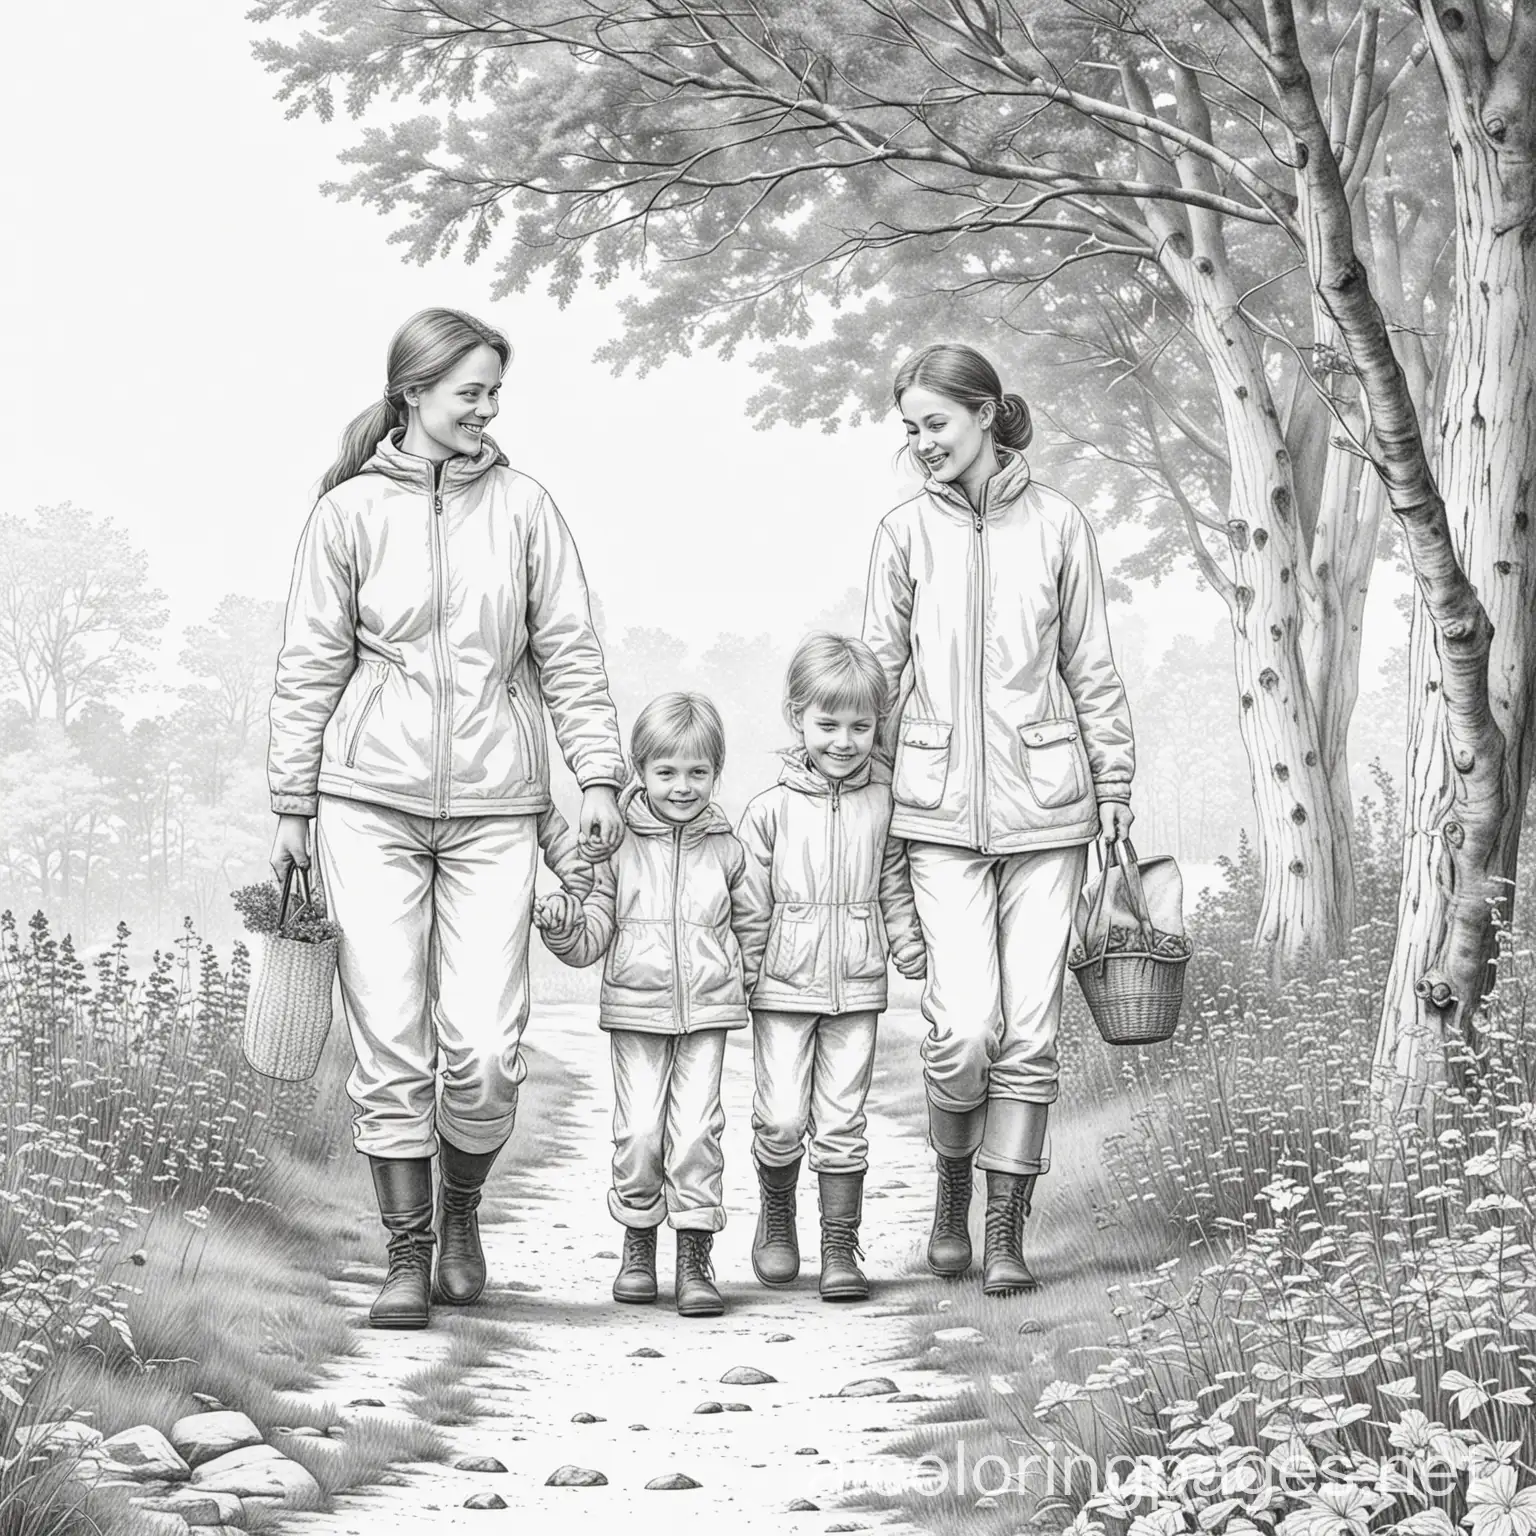 A family outdoors from Estonia Finland, Coloring Page, black and white, line art, white background, Simplicity, Ample White Space. The background of the coloring page is plain white to make it easy for young children to color within the lines. The outlines of all the subjects are easy to distinguish, making it simple for kids to color without too much difficulty